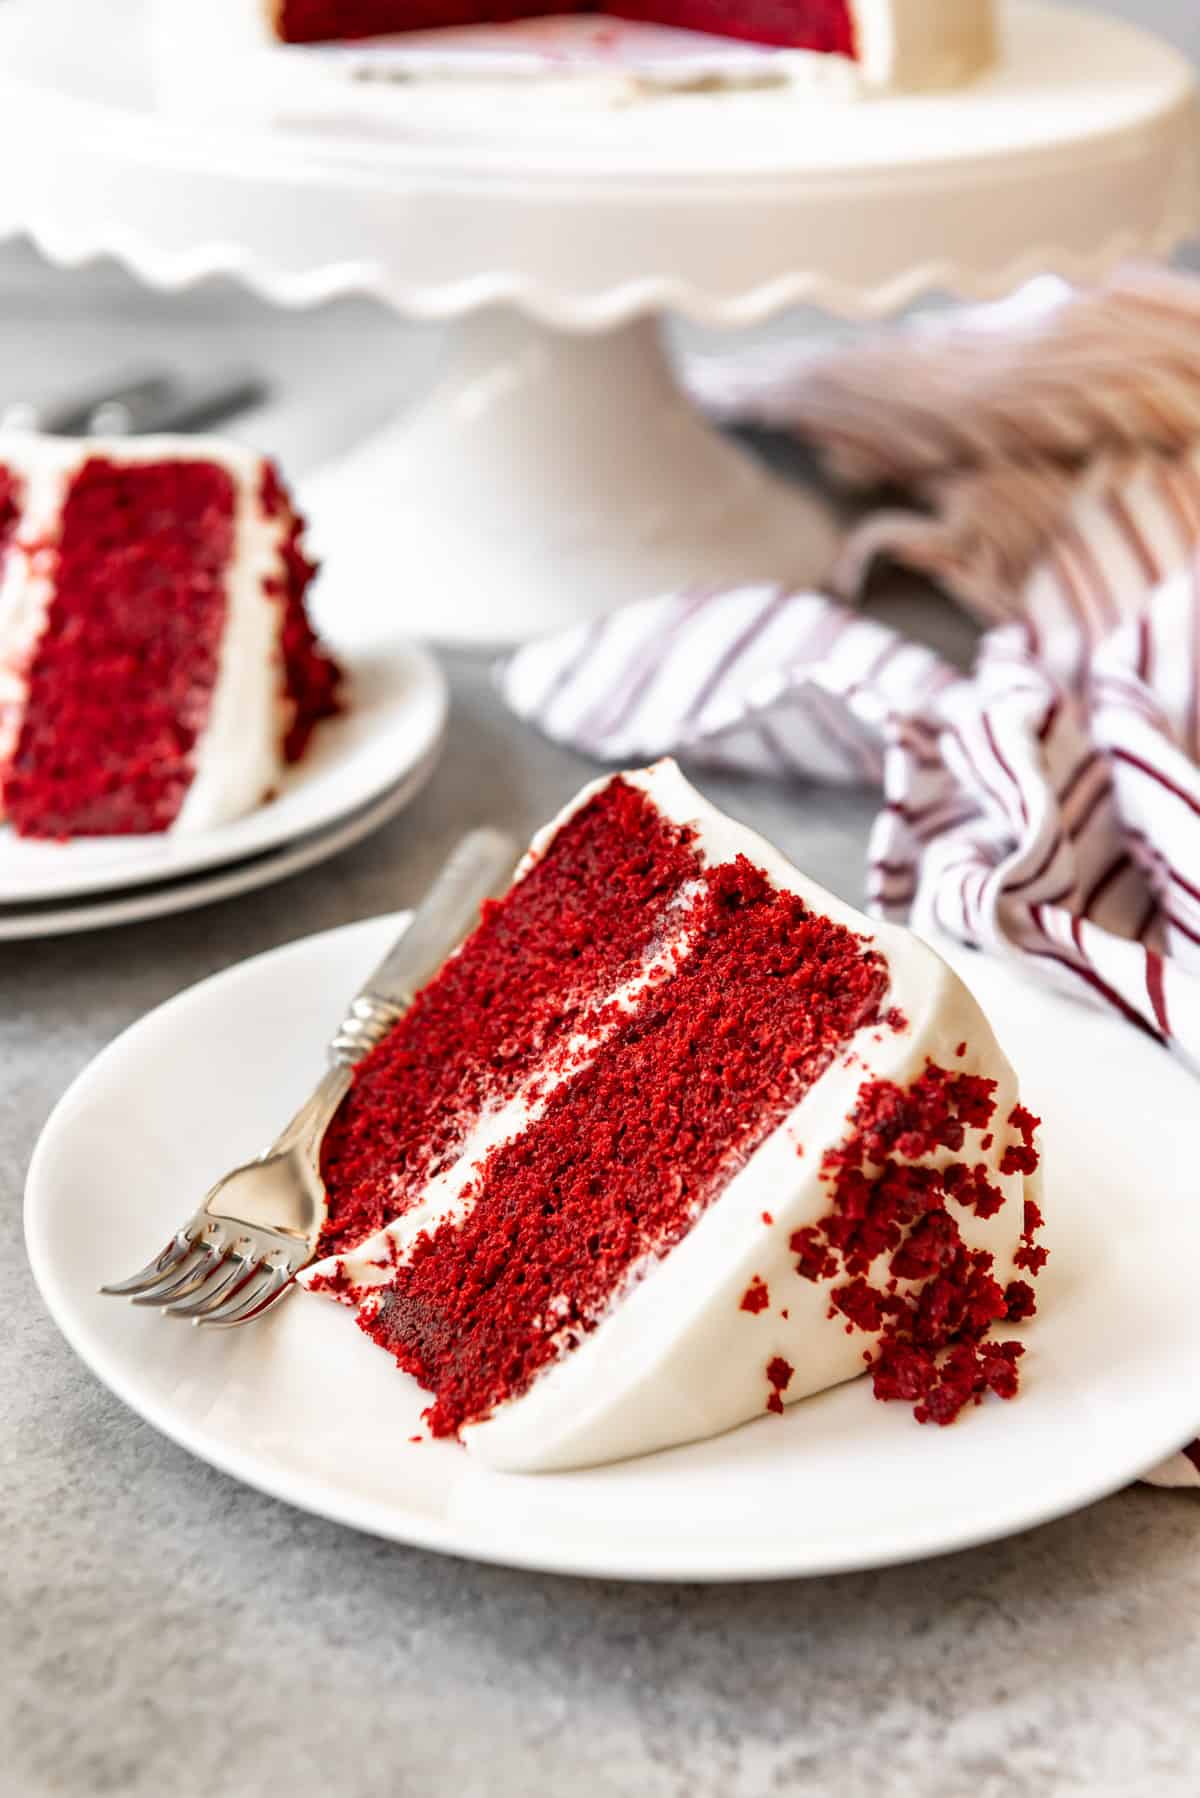 An image of a moist homemade red velvet cake made from scratch.